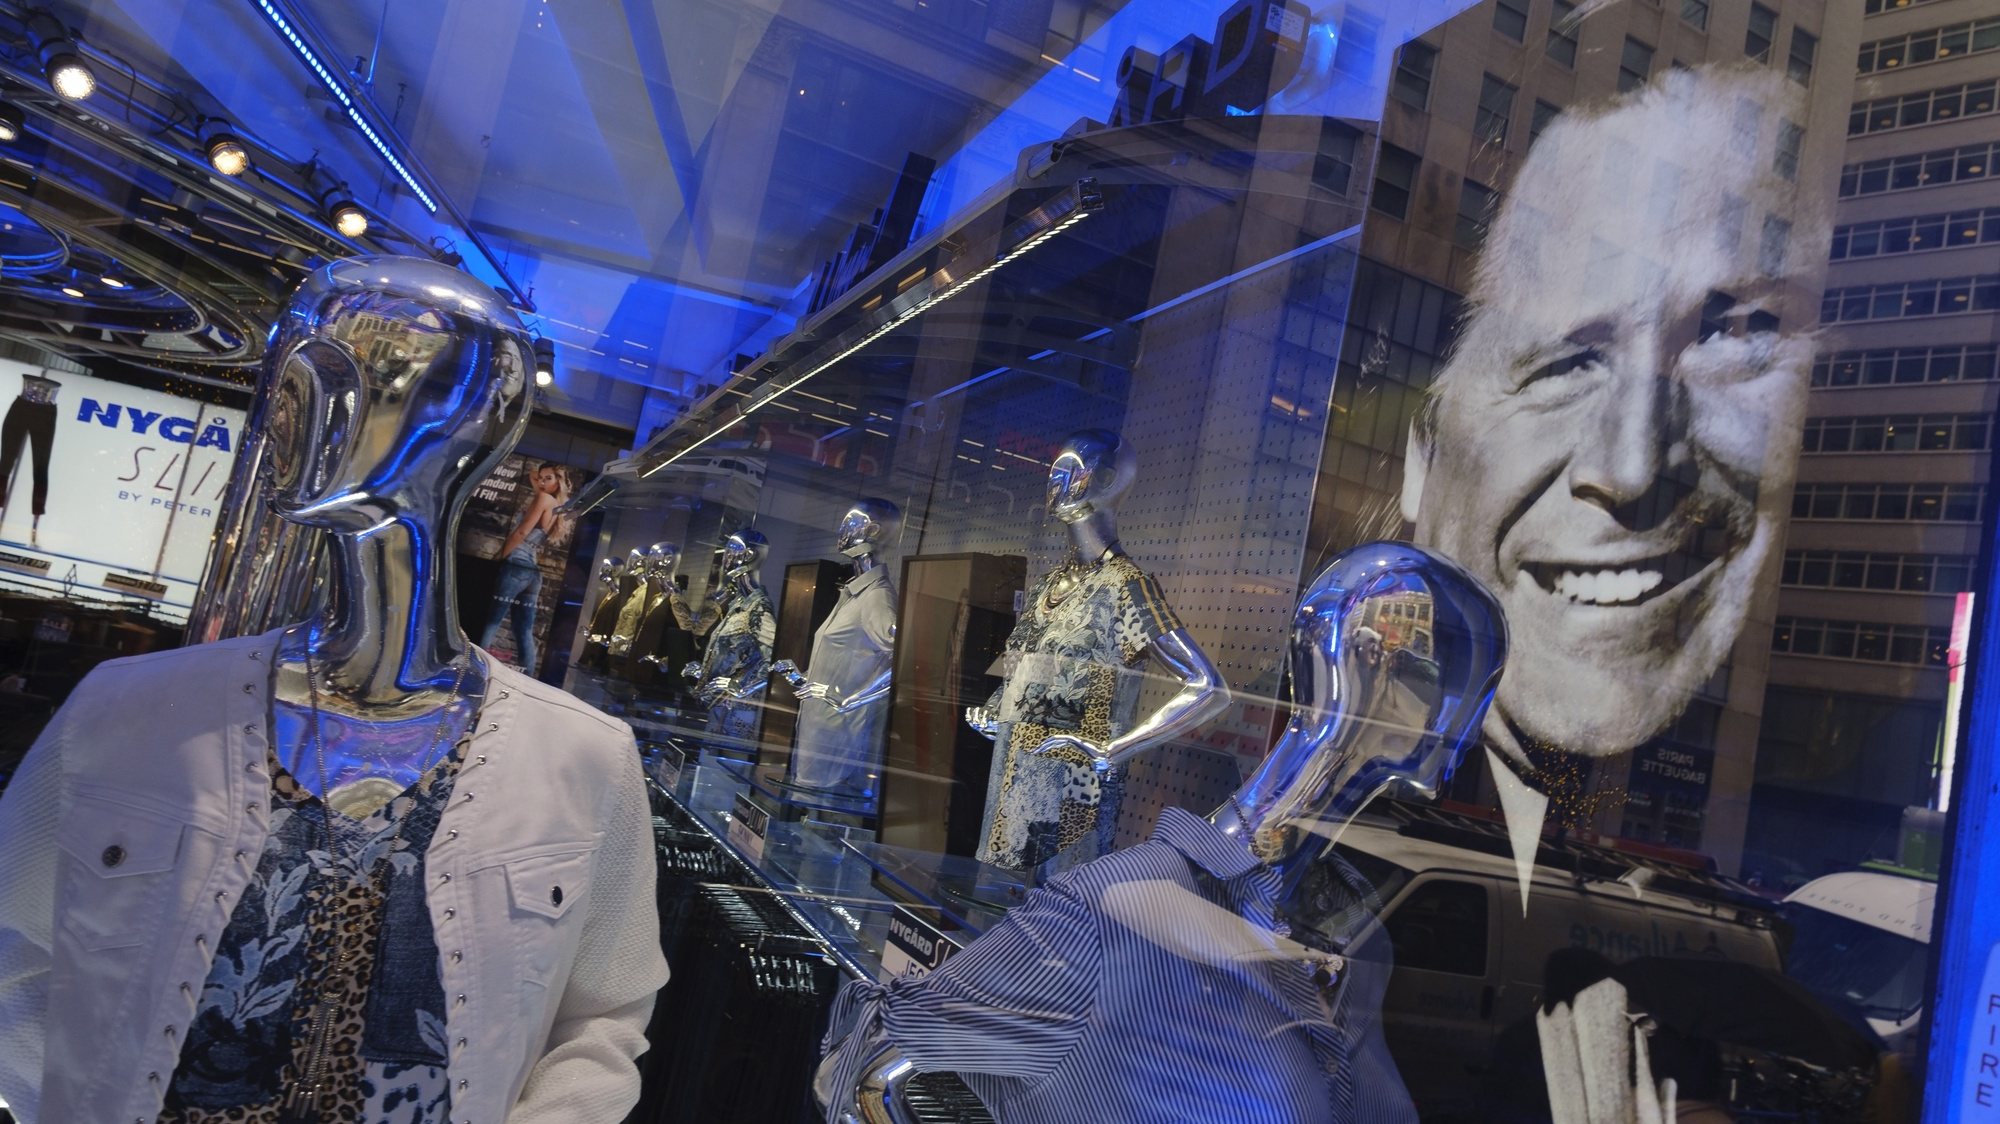 epa08887231 (FILE) - A picture of Peter Nygard is seen in a Nygard store in New York, New York, USA, 26 February 2020 (reissued 16 December 2020). According to media reprots, CEO Peter Nygard was arrested in Canada as part of investigations into federal sex-trafficking allegations against him.  EPA/JUSTIN LANE *** Local Caption *** 55907690